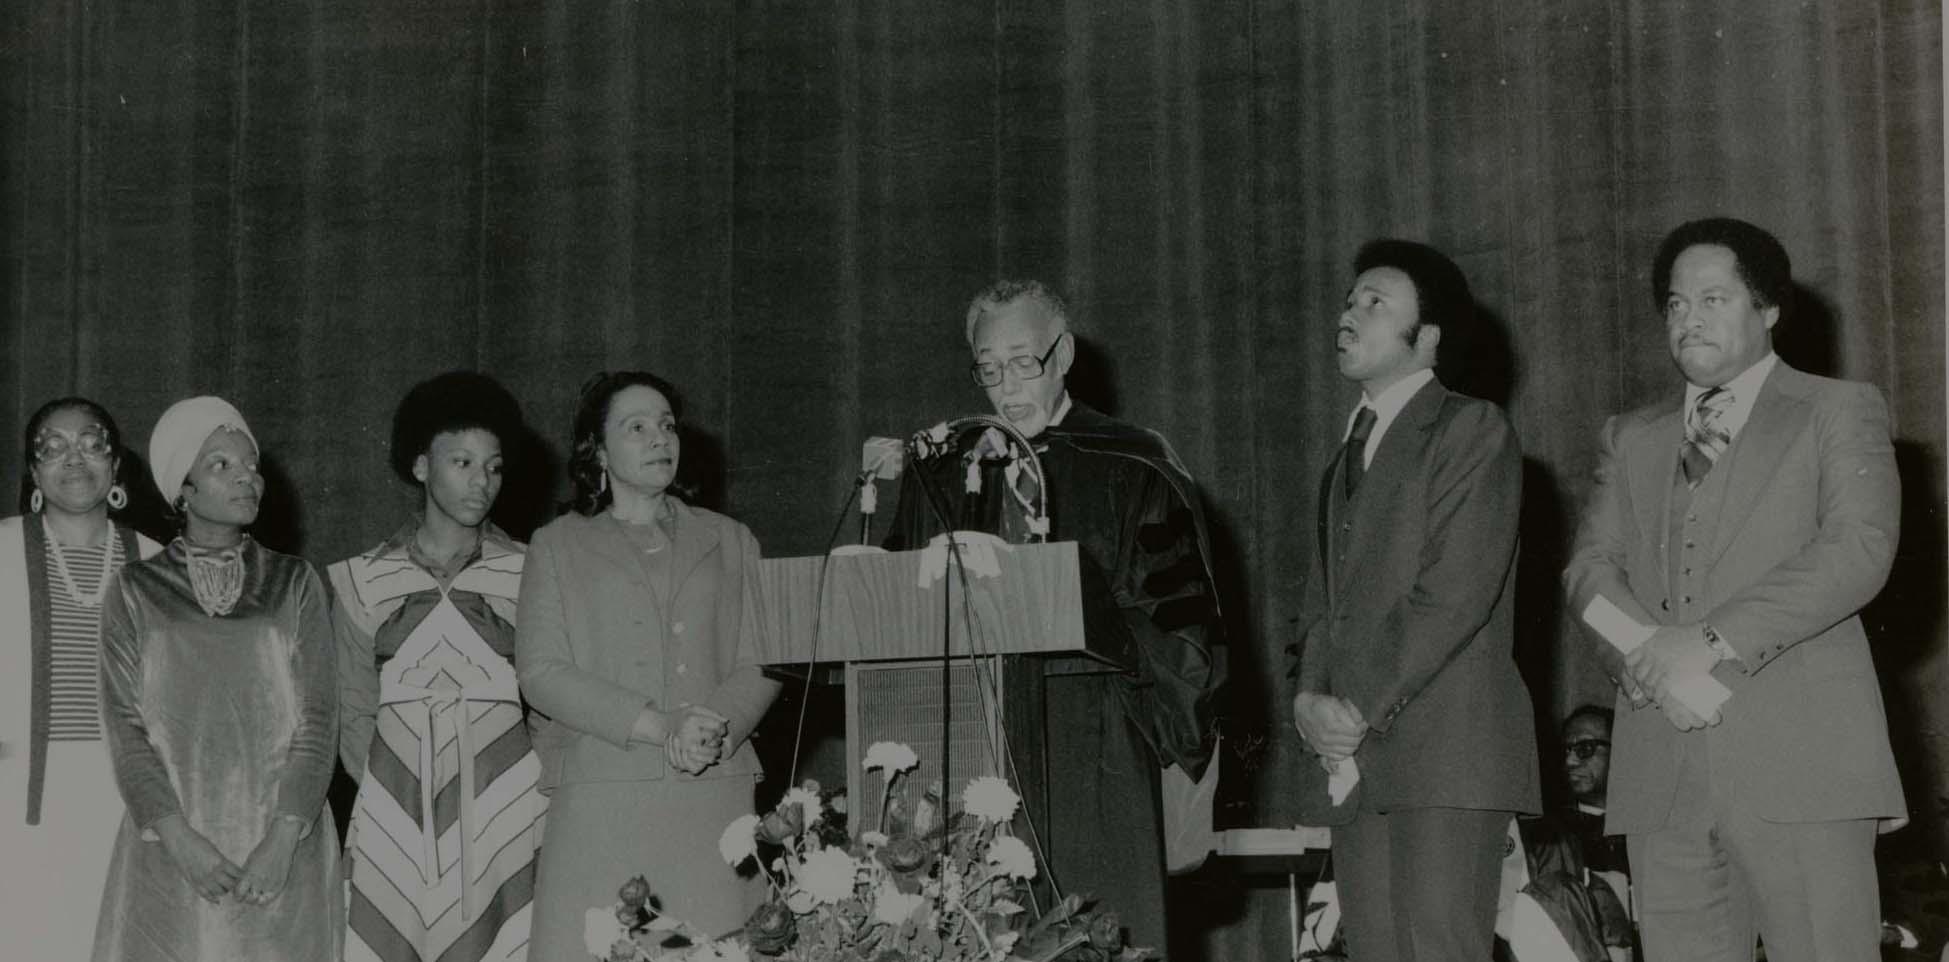 Hugh M. Gloster, President of Morehouse College (1967-1987), was professionally active as administrator, teacher, writer, speaker, USO wartime executive, and American representative in educational and technical programs in foreign countries.This collection consists of photographs that document Dr. Hugh Gloster's time at Morehouse College such as: commencements, Convocation, Founders' Day, banquets, and school events.

At the AUC Robert W. Woodruff Library we are always striving to improve our digital collections. We welcome additional information about people, places, or events depicted in any of the works in this collection. To submit information, please contact us at DSD@auctr.edu. 